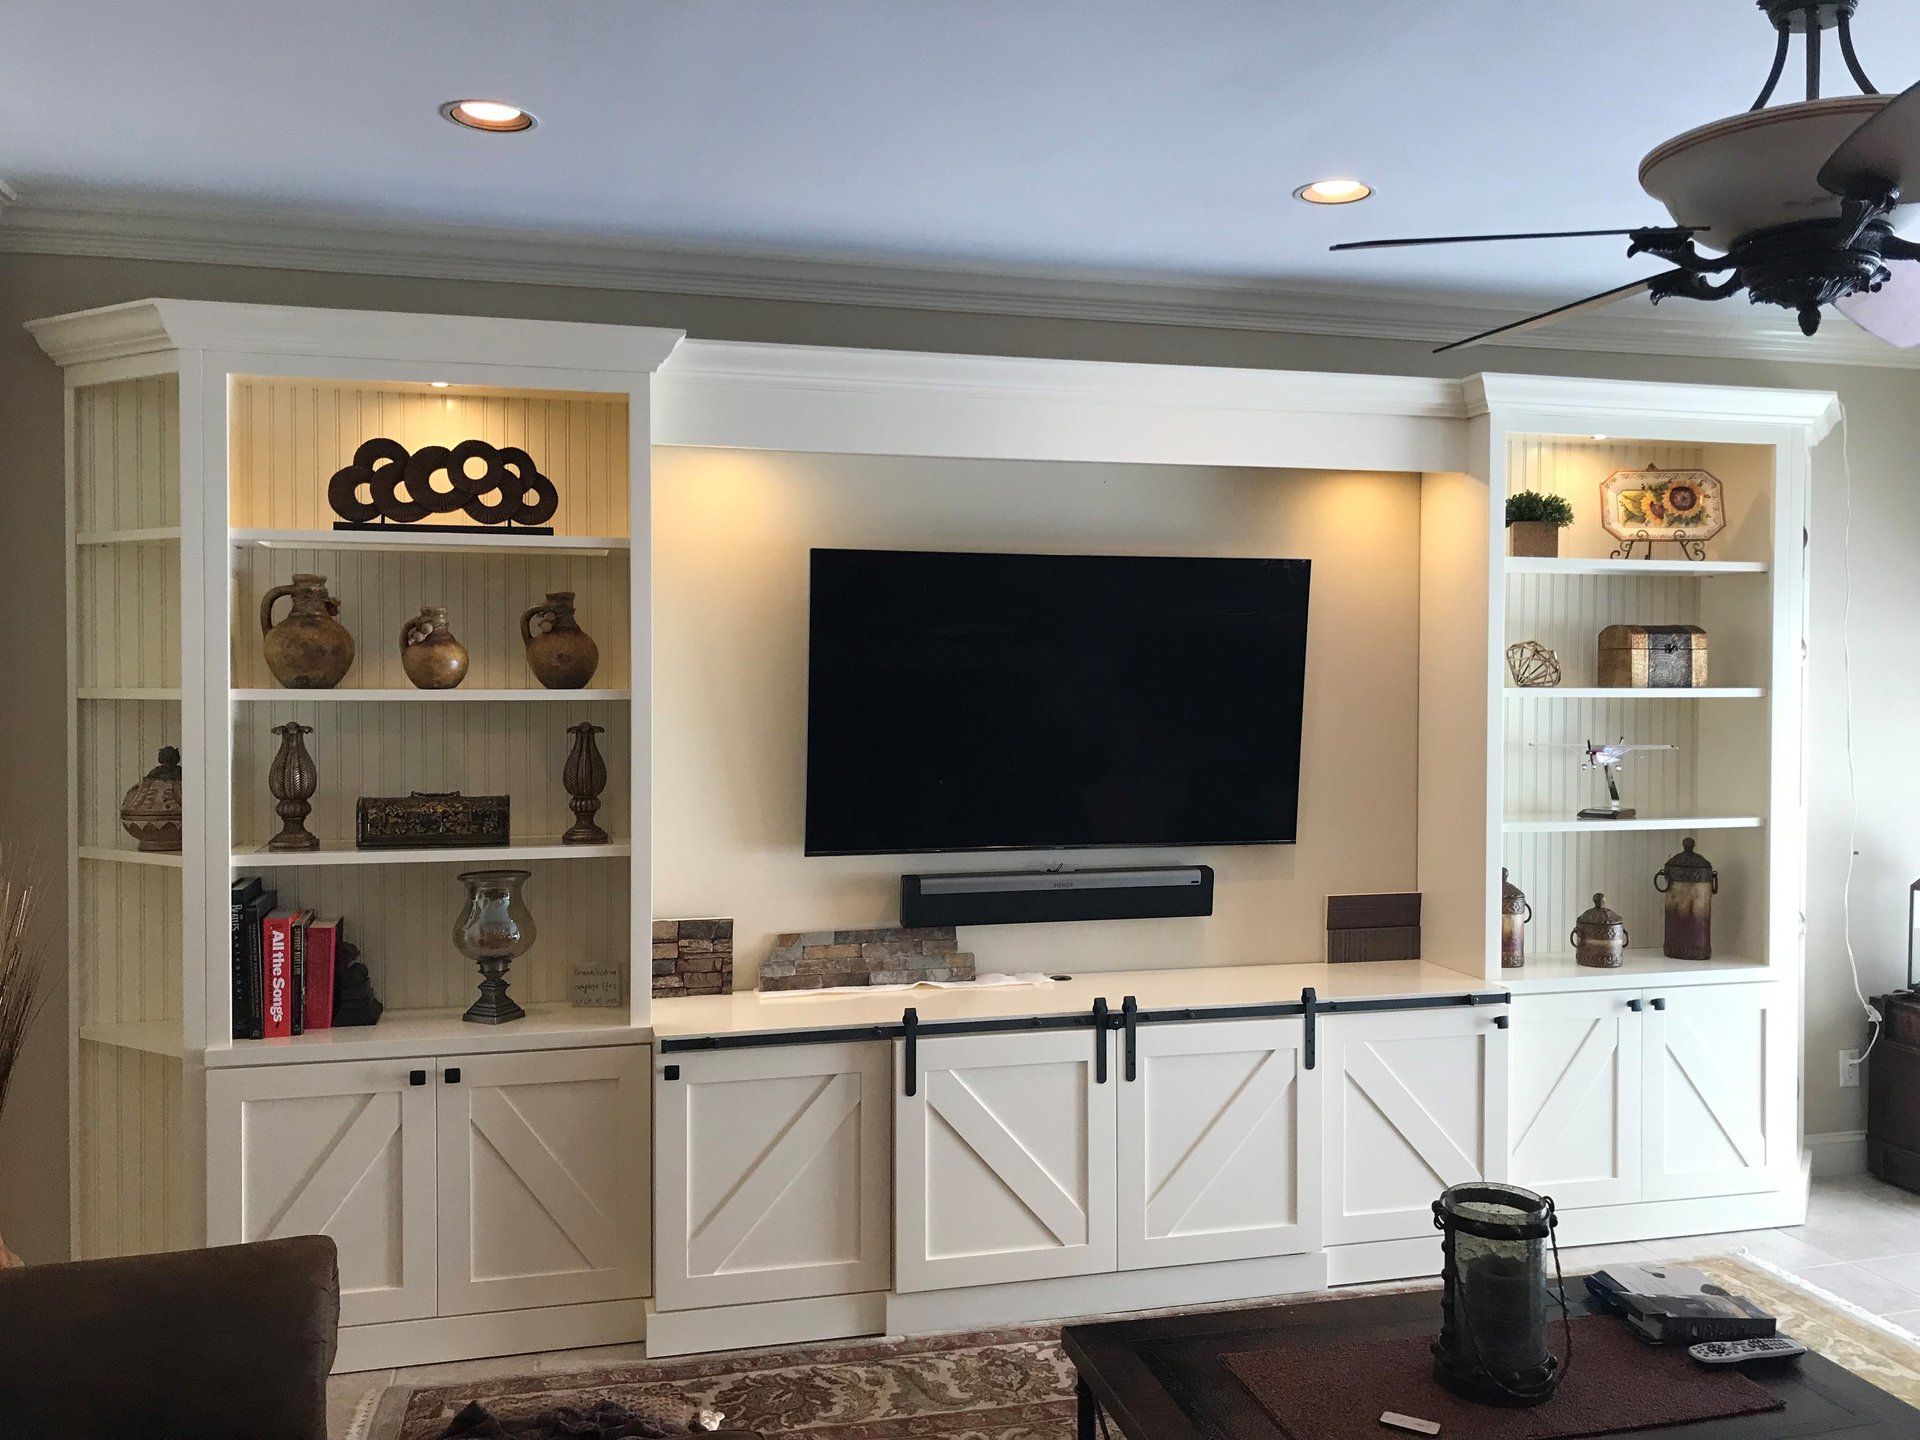 Entertainment center and fireplace surrounds